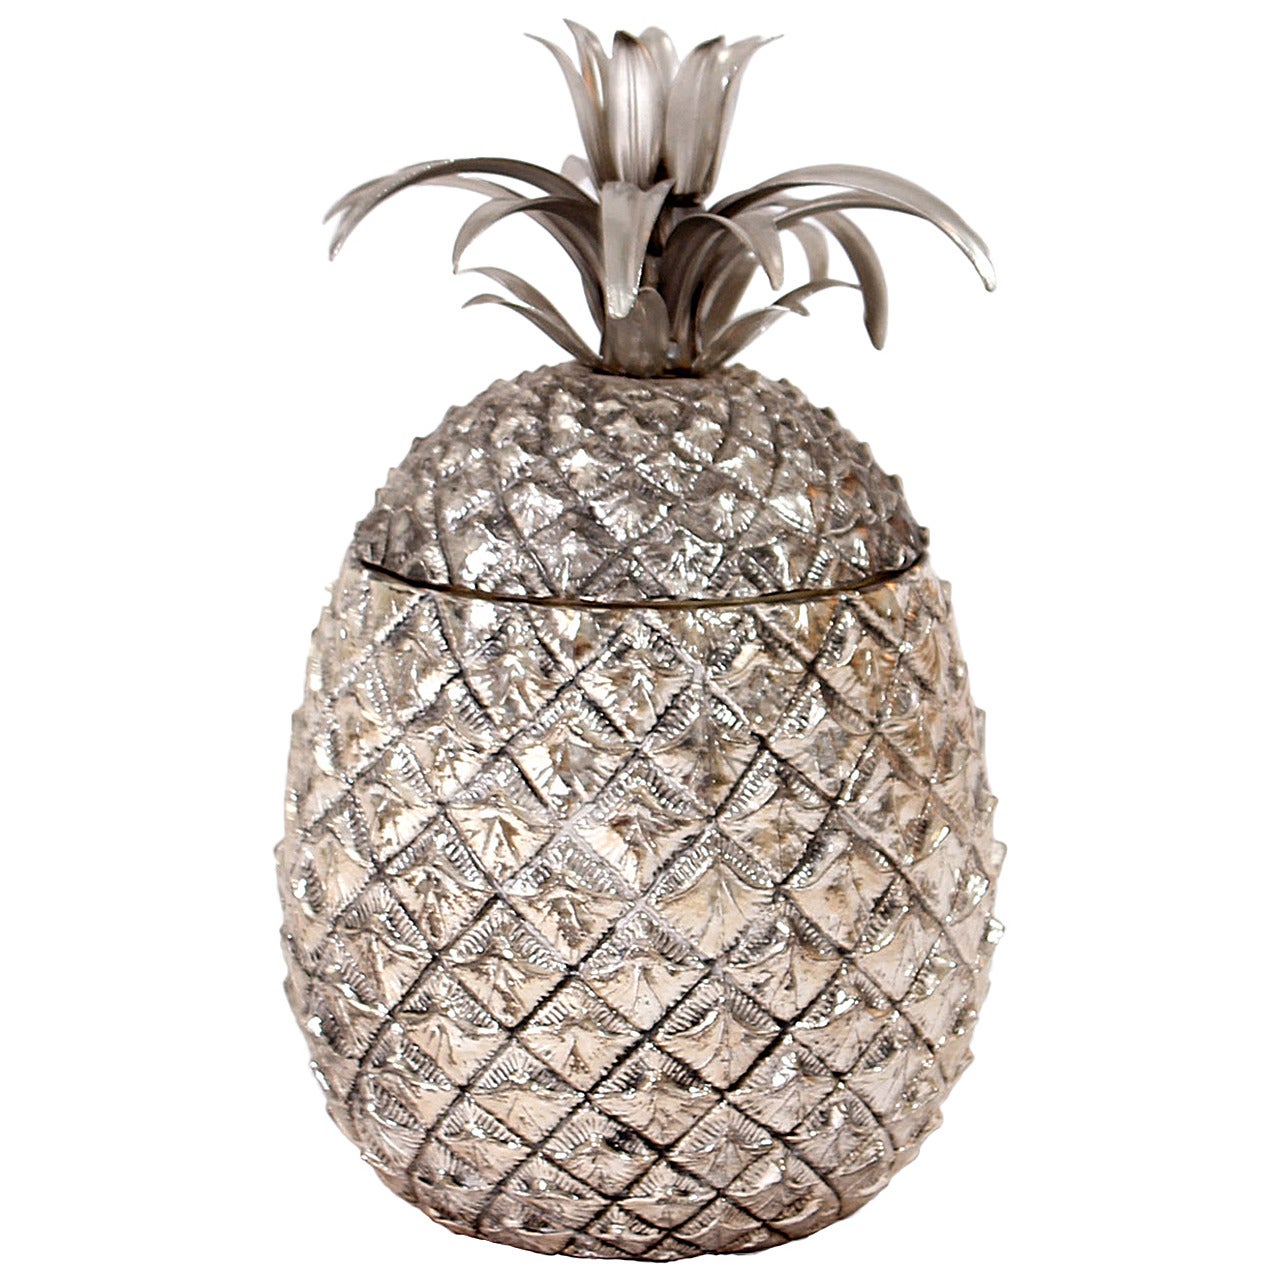 Pineapple Ice Bucket Designed by Mauro Manetti